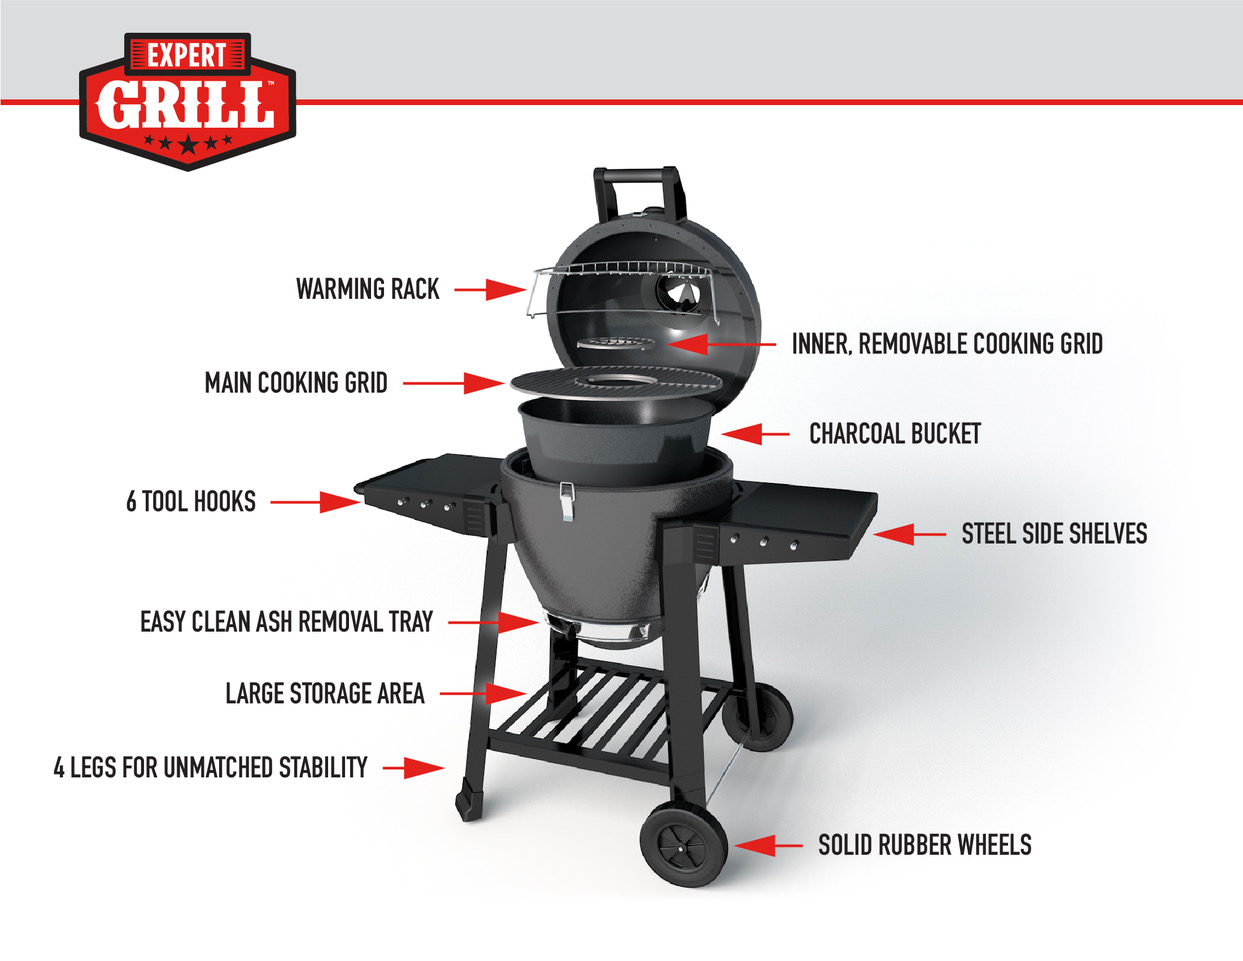 Expert Grill Kamado Charcoal Grill - image 5 of 12